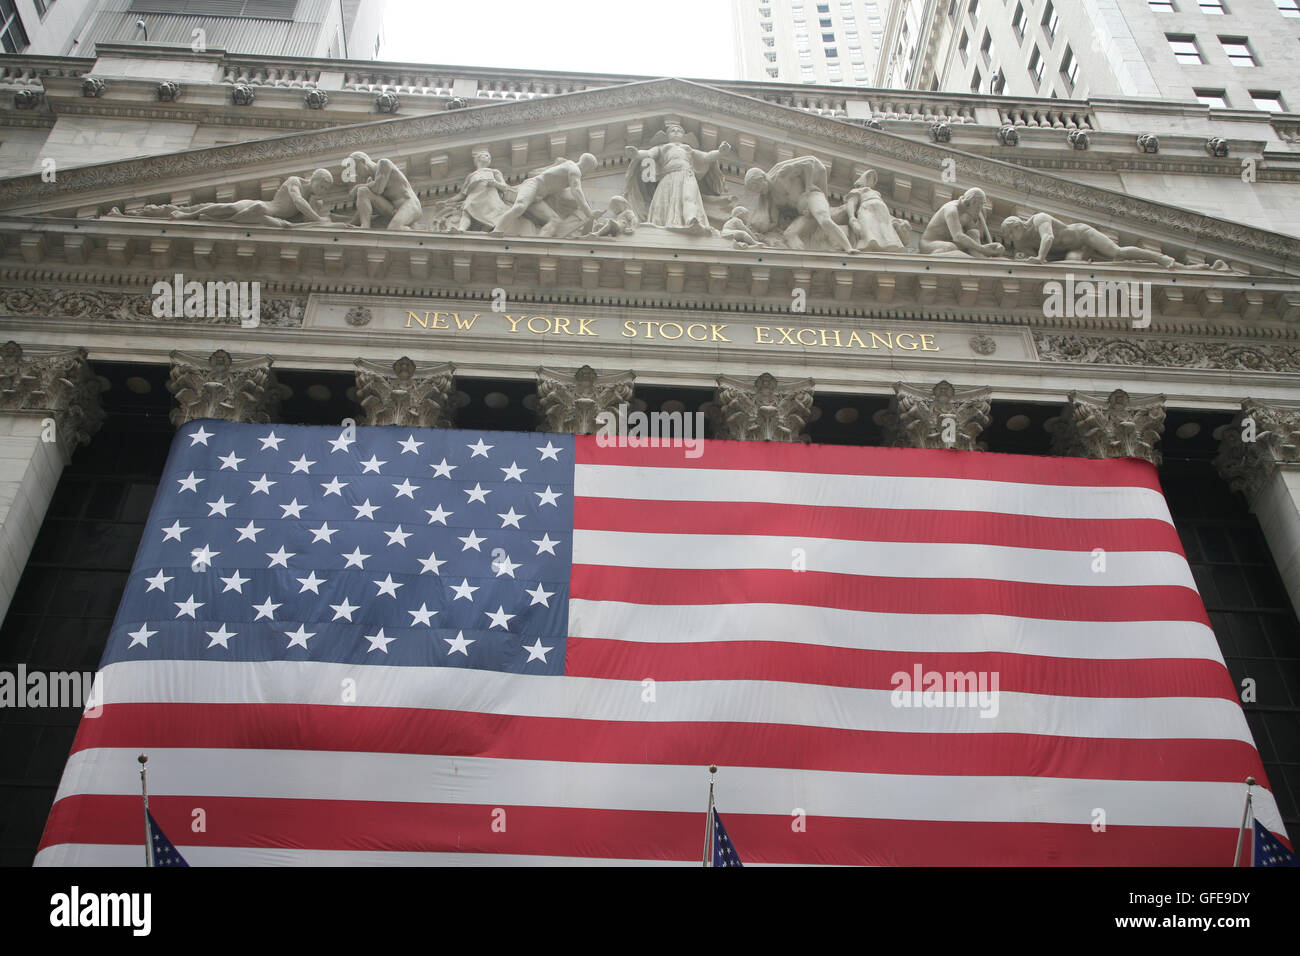 New York Stock exchange at Wall Street with the American flag on facades Stock Photo